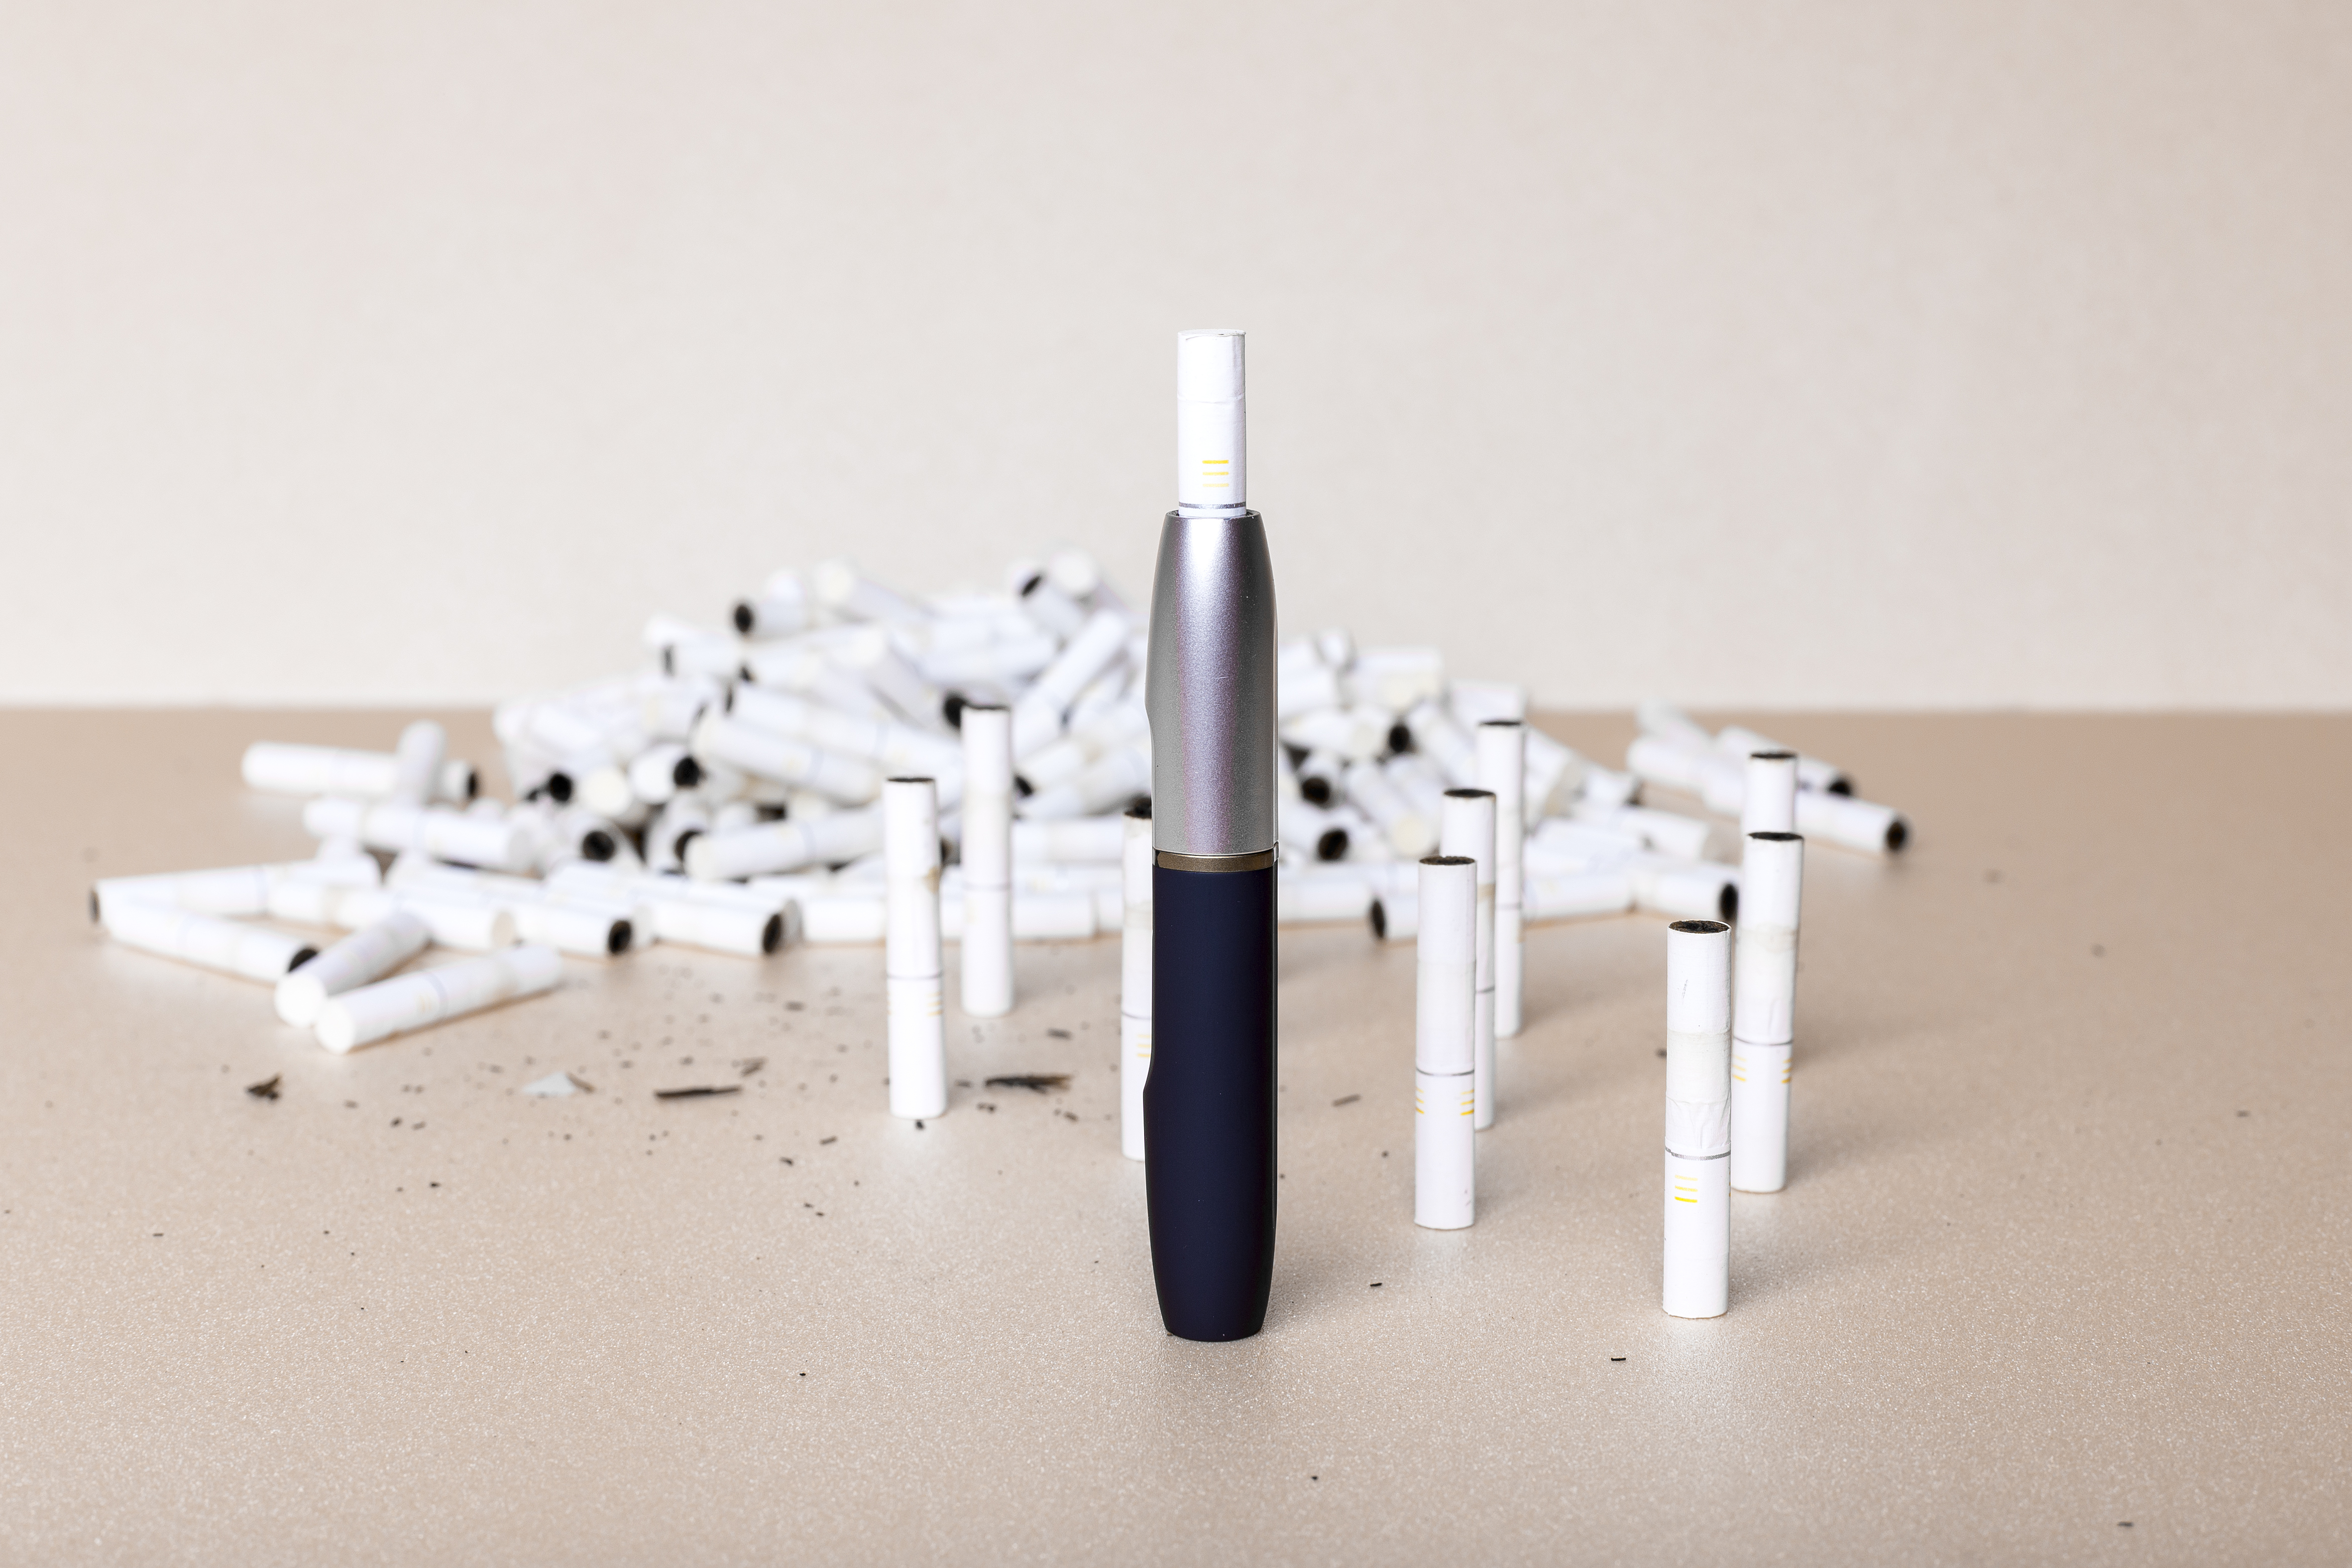 iQOS heated tobacco product in the foreground with heat sticks littering the background